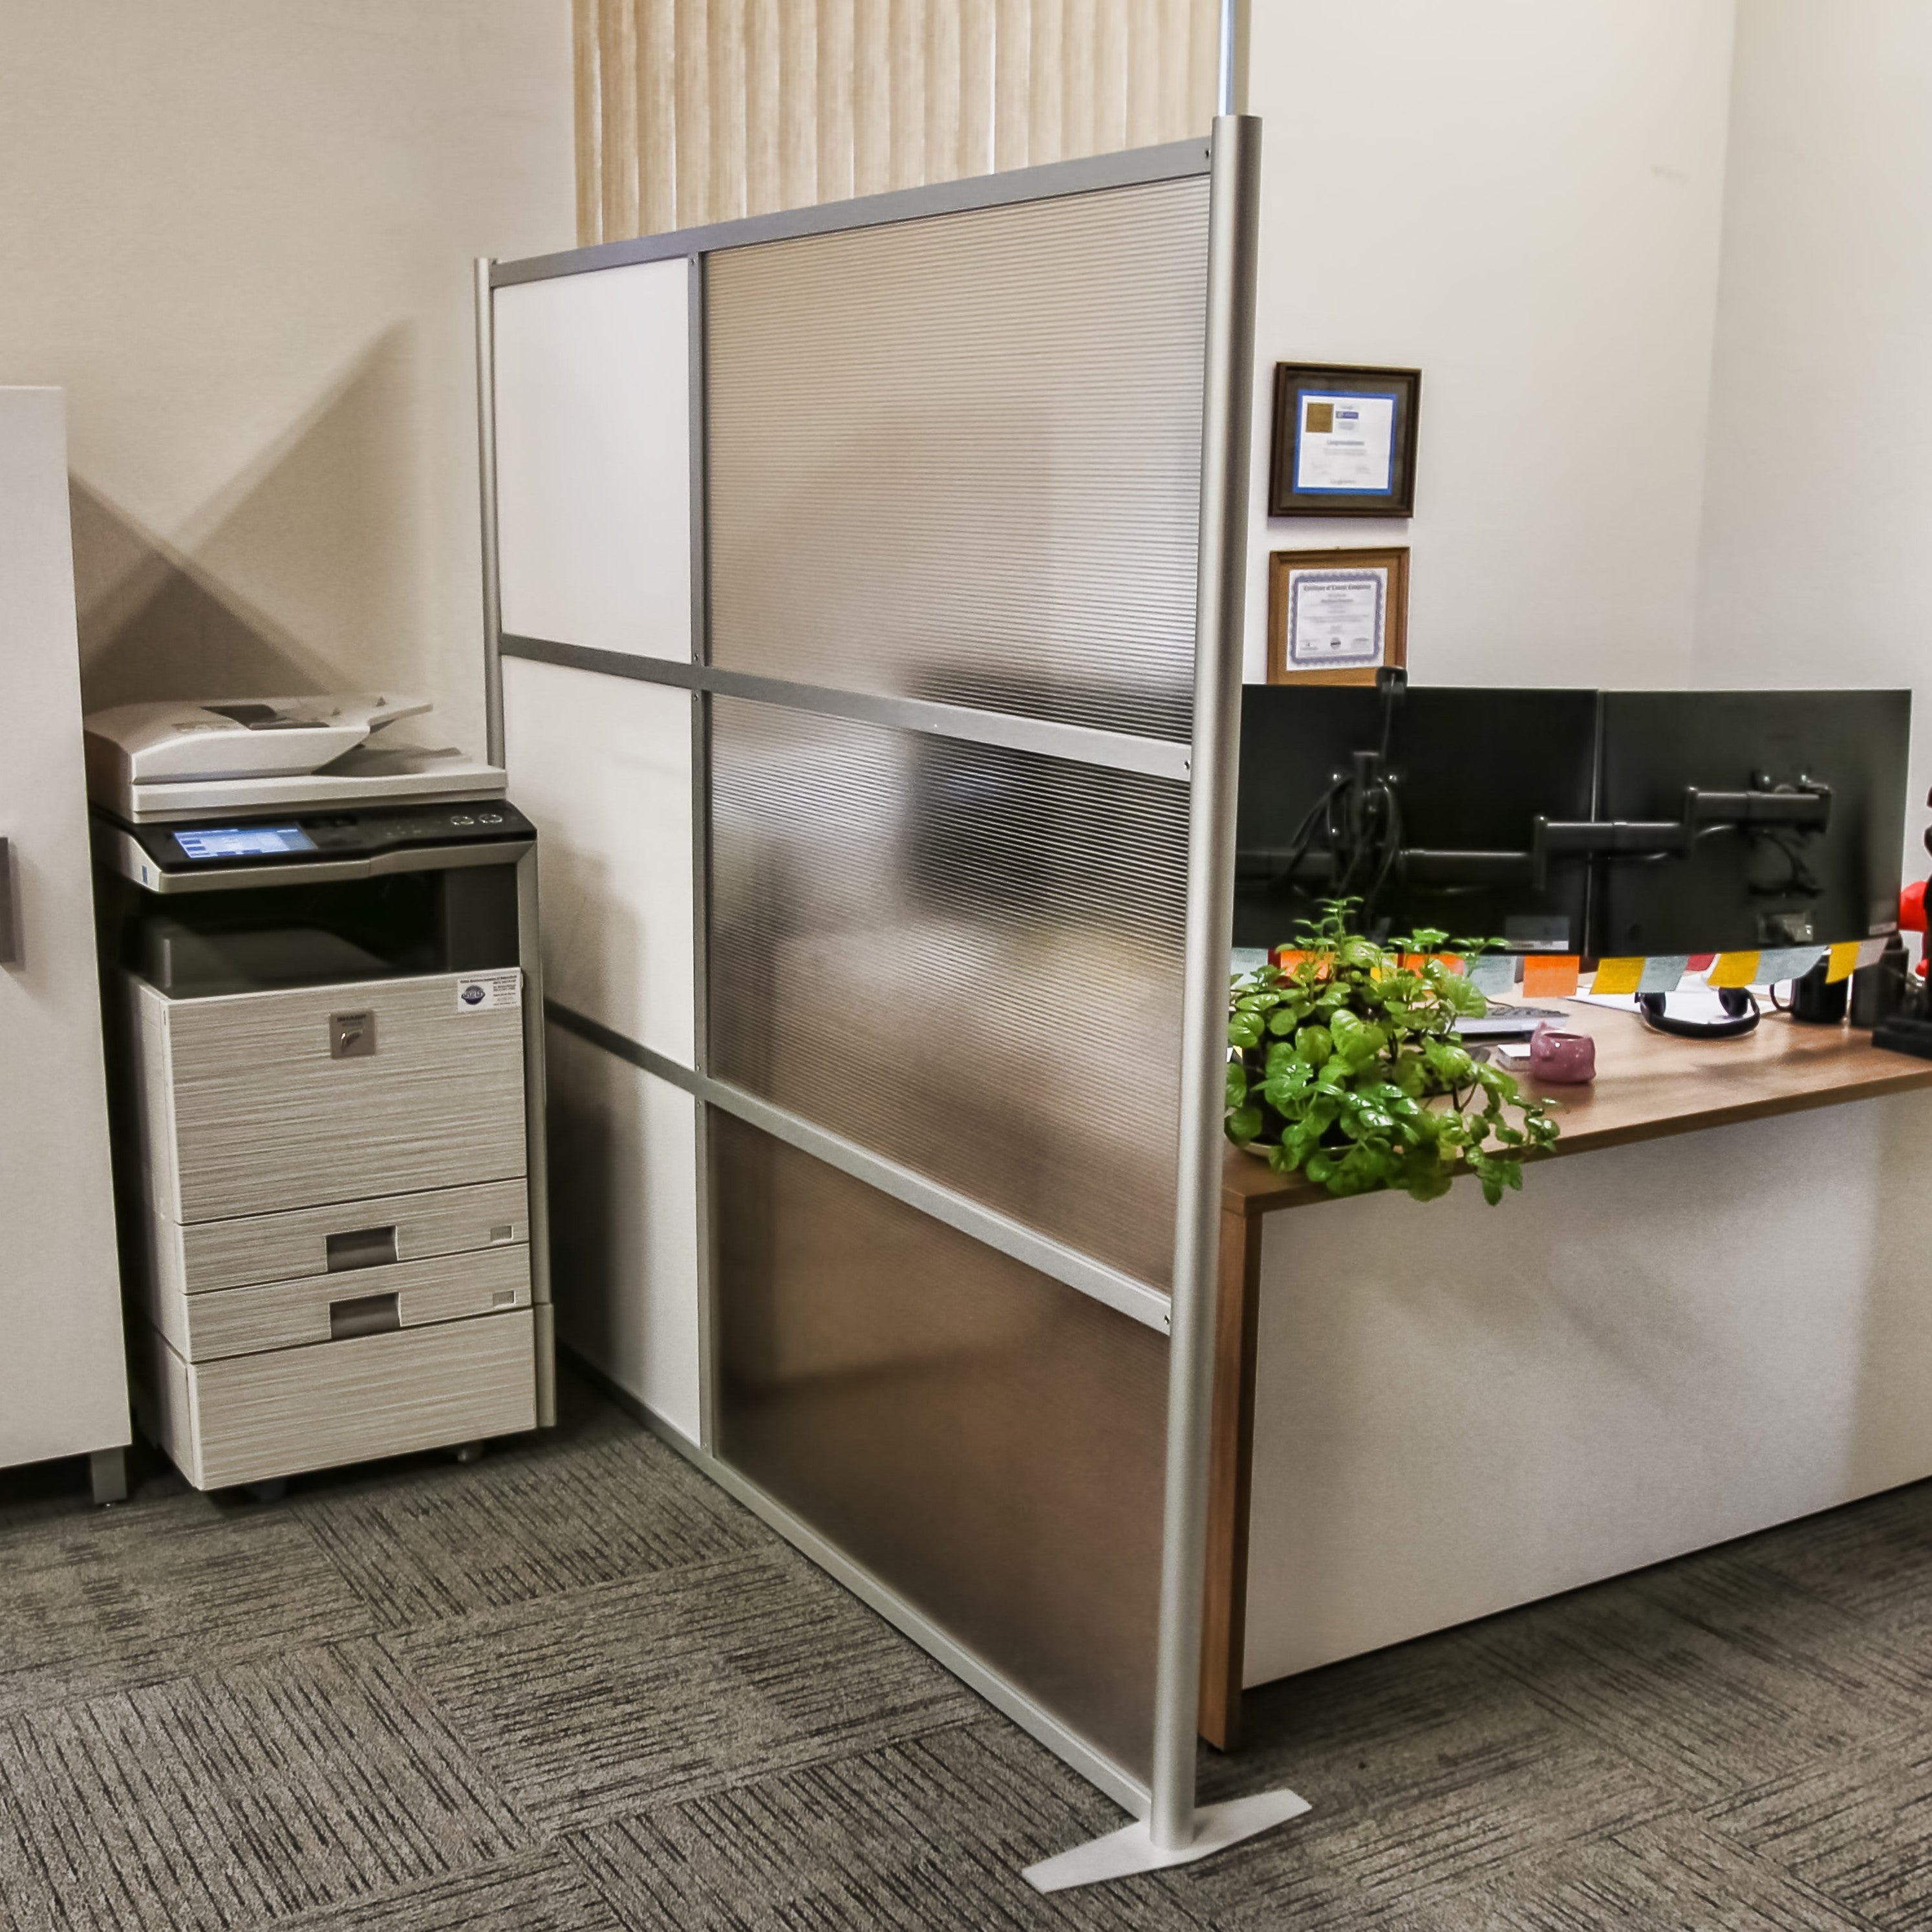 How to create a home office using modular room dividers